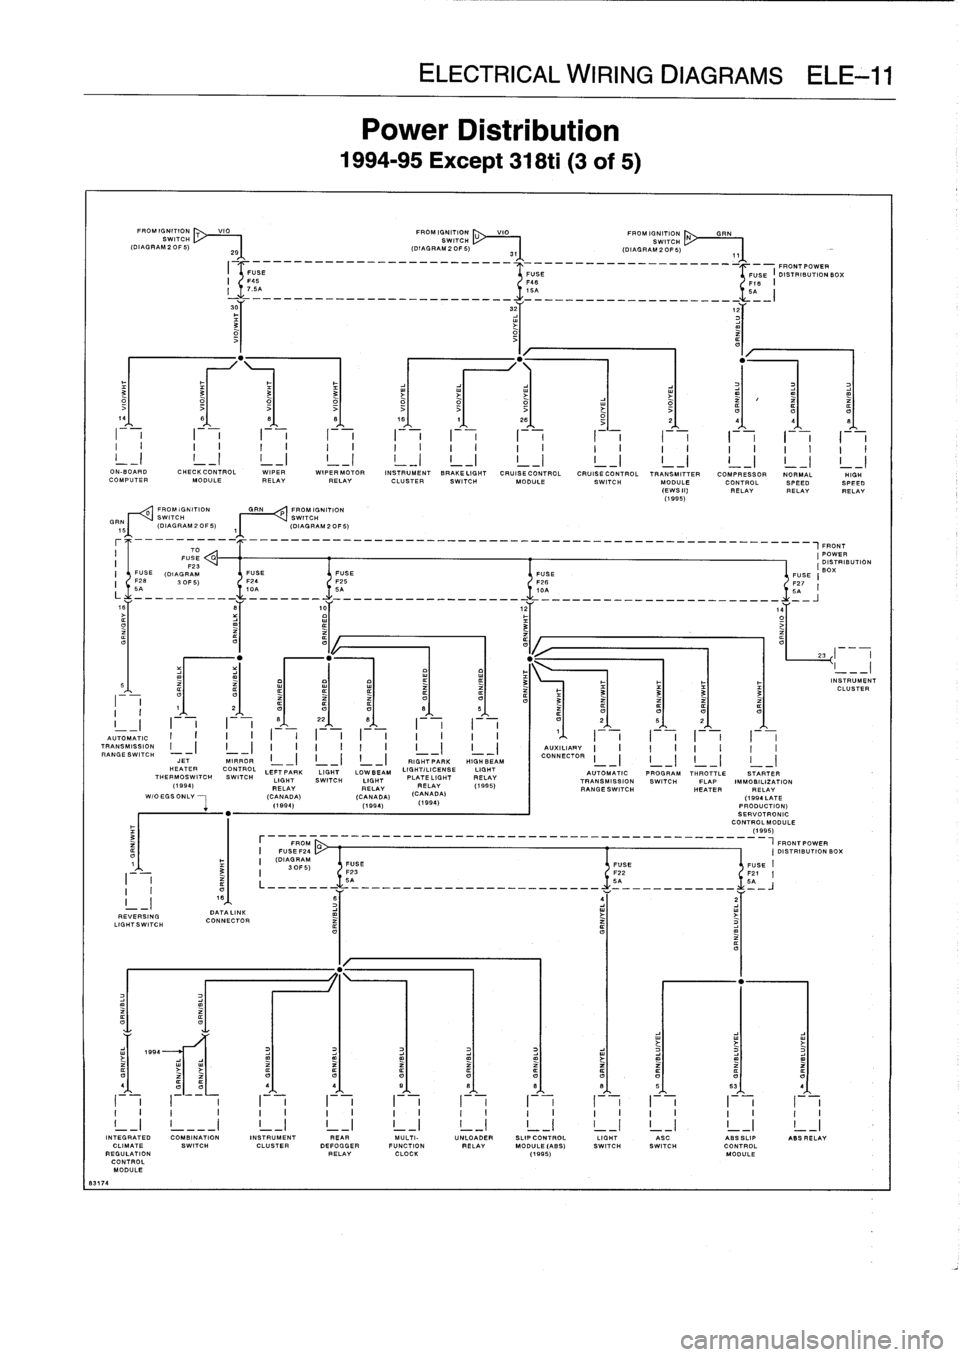 BMW 318i 1997 E36 Service Manual 
8317
4

FROMIGNITION
T

	

VIO

	

FROM
IGNITION
U

	

VIO

	

"I"
IGNITION
SWITCH

	

SWITCH

	

SWITCH
(DIAGRAM2OF5)
29

	

(DIAGRAM20F5)
31

	

(DIAGRAM20F5)

FROMIGNITION
GRIN
PROMIGNITION
SWITCH